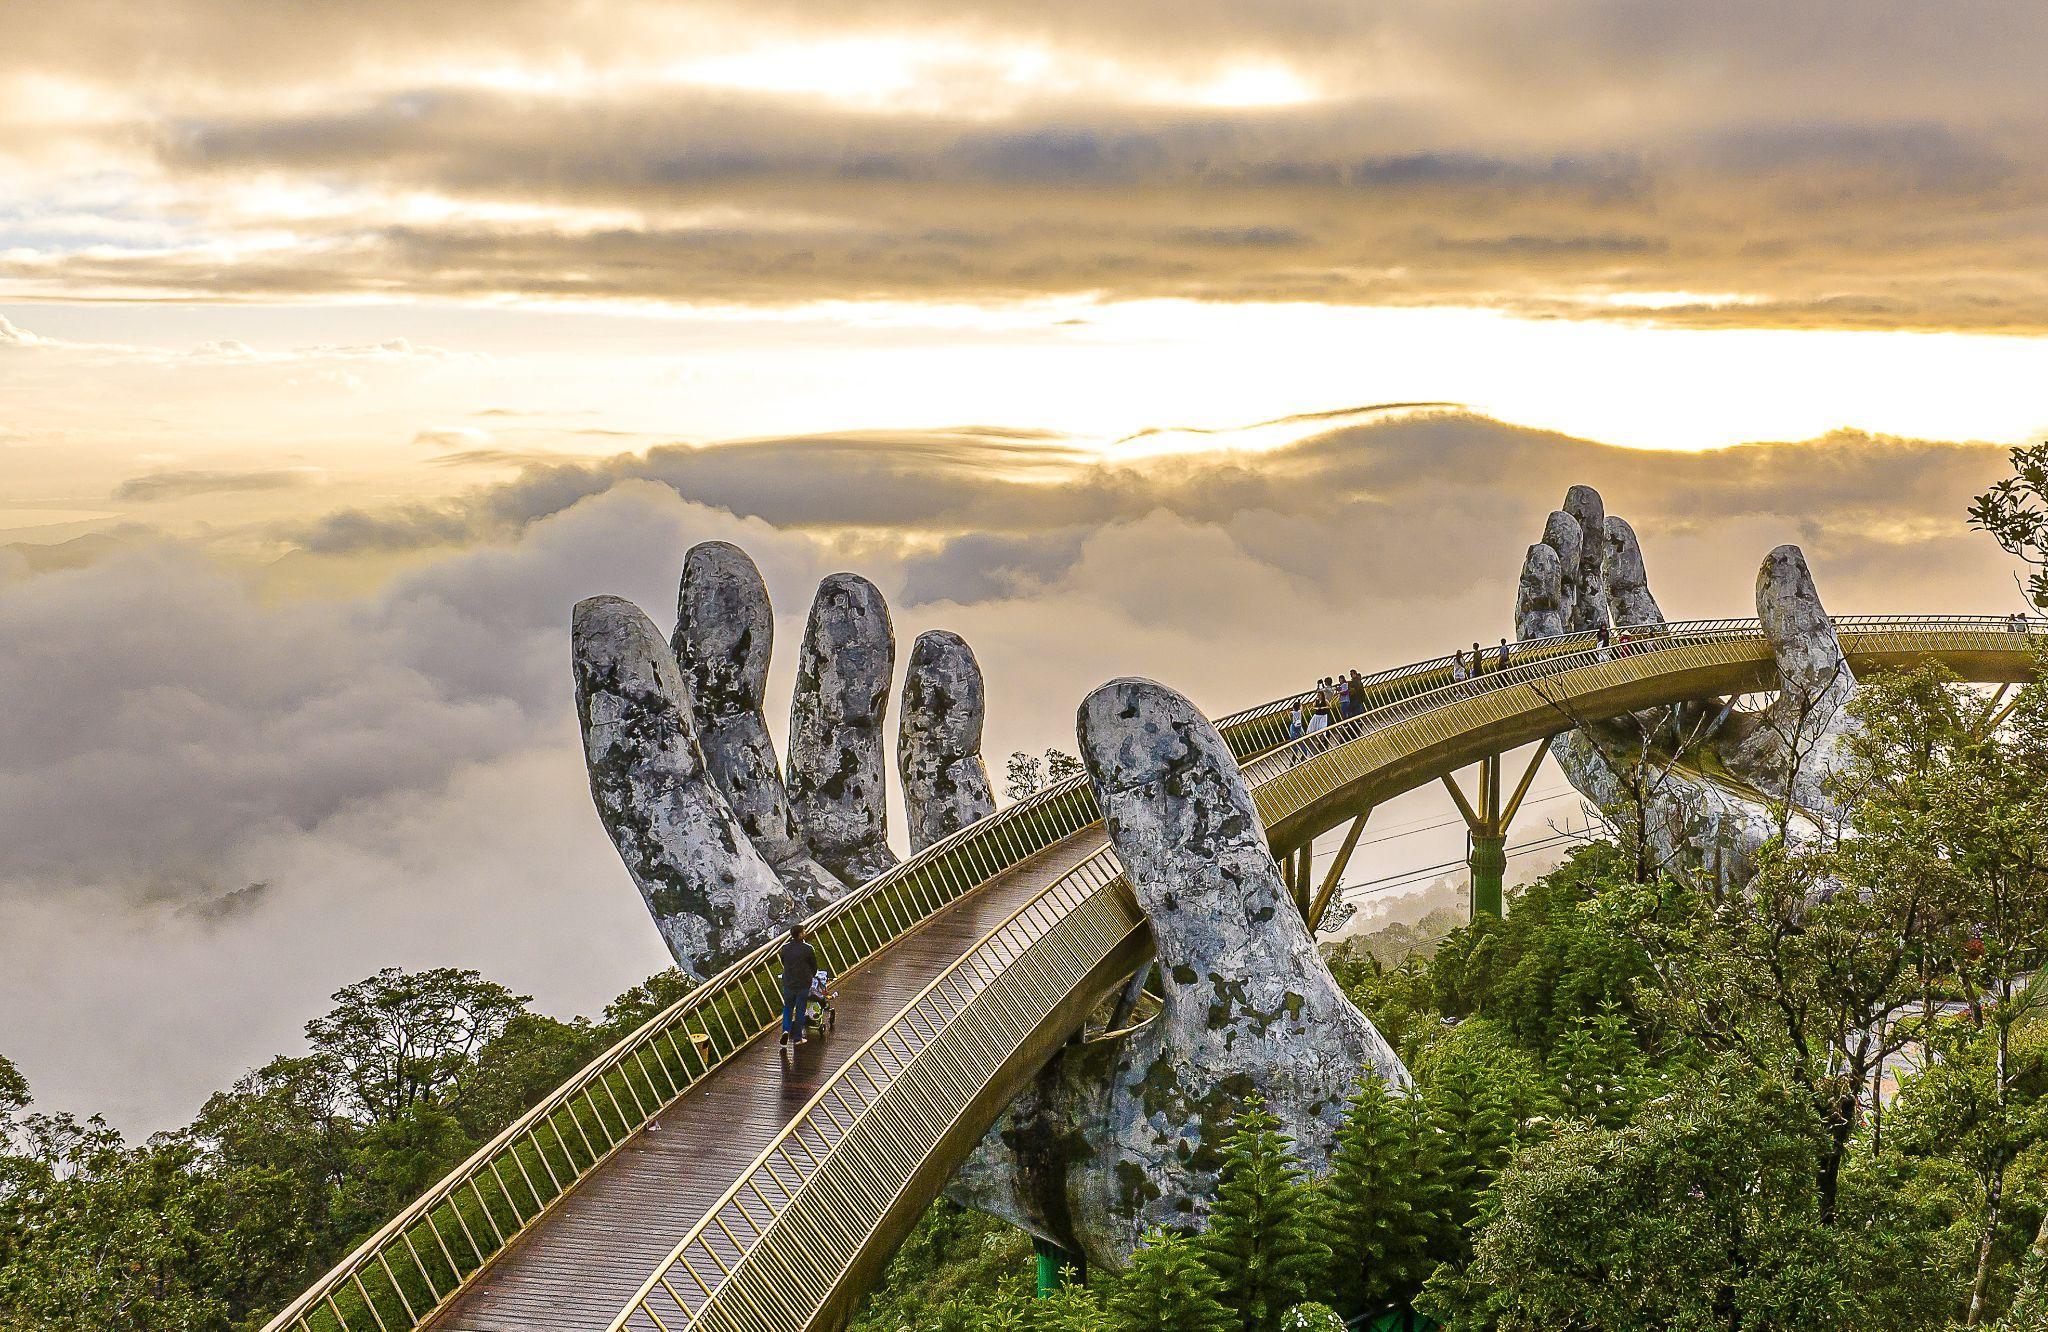 Golden Bridge in the middle of a sea of clouds. Photo: Da Nang Photography Club